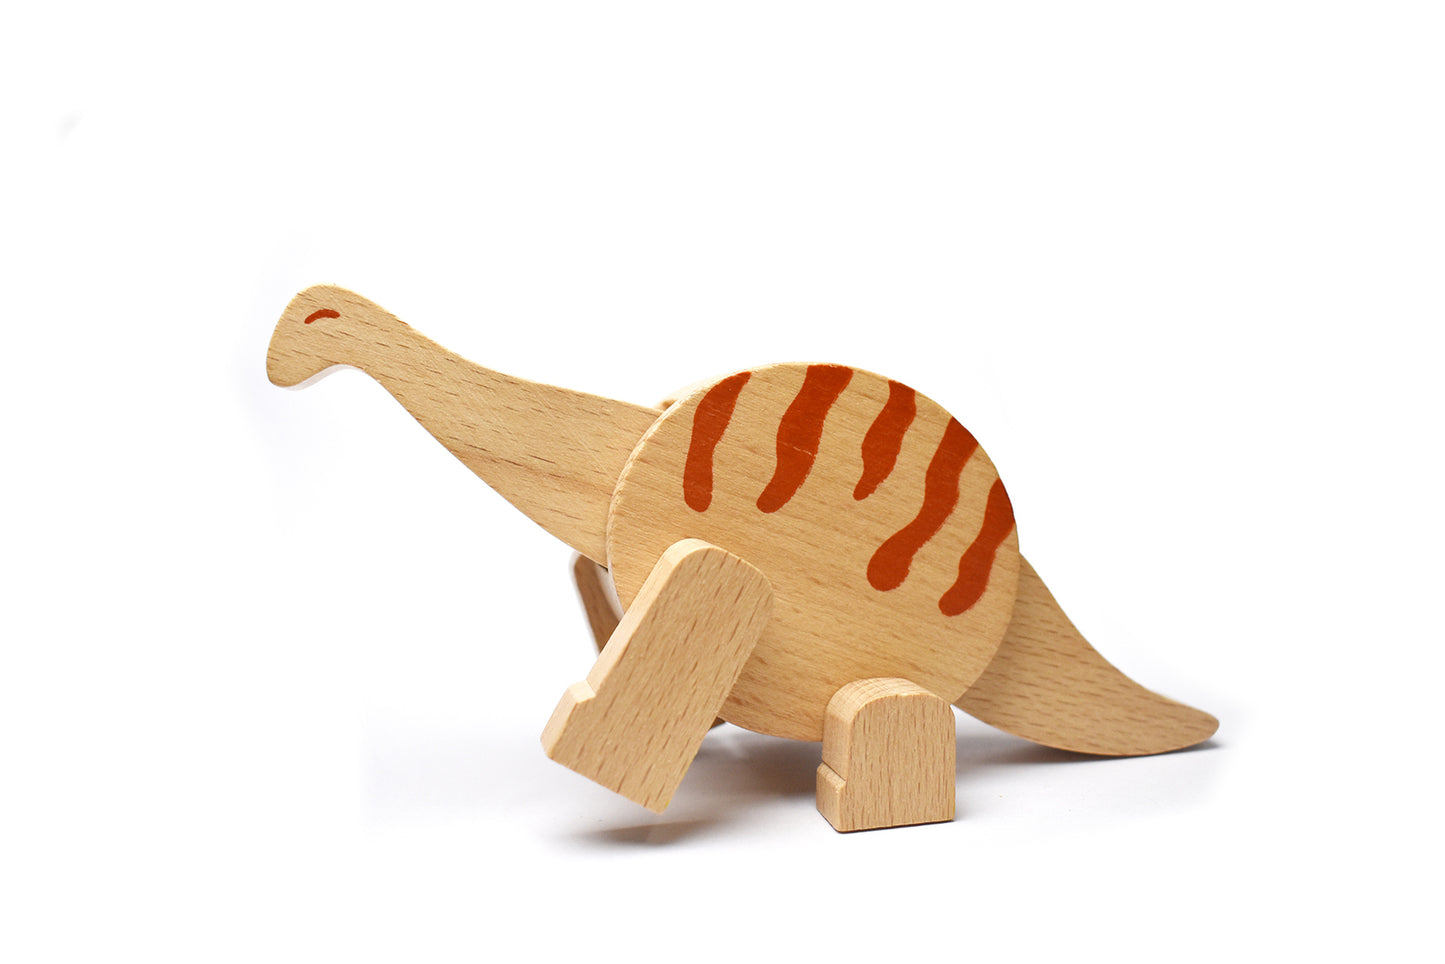 PRICE FOR 6 ASSORTED WOODEN DINOSAUR